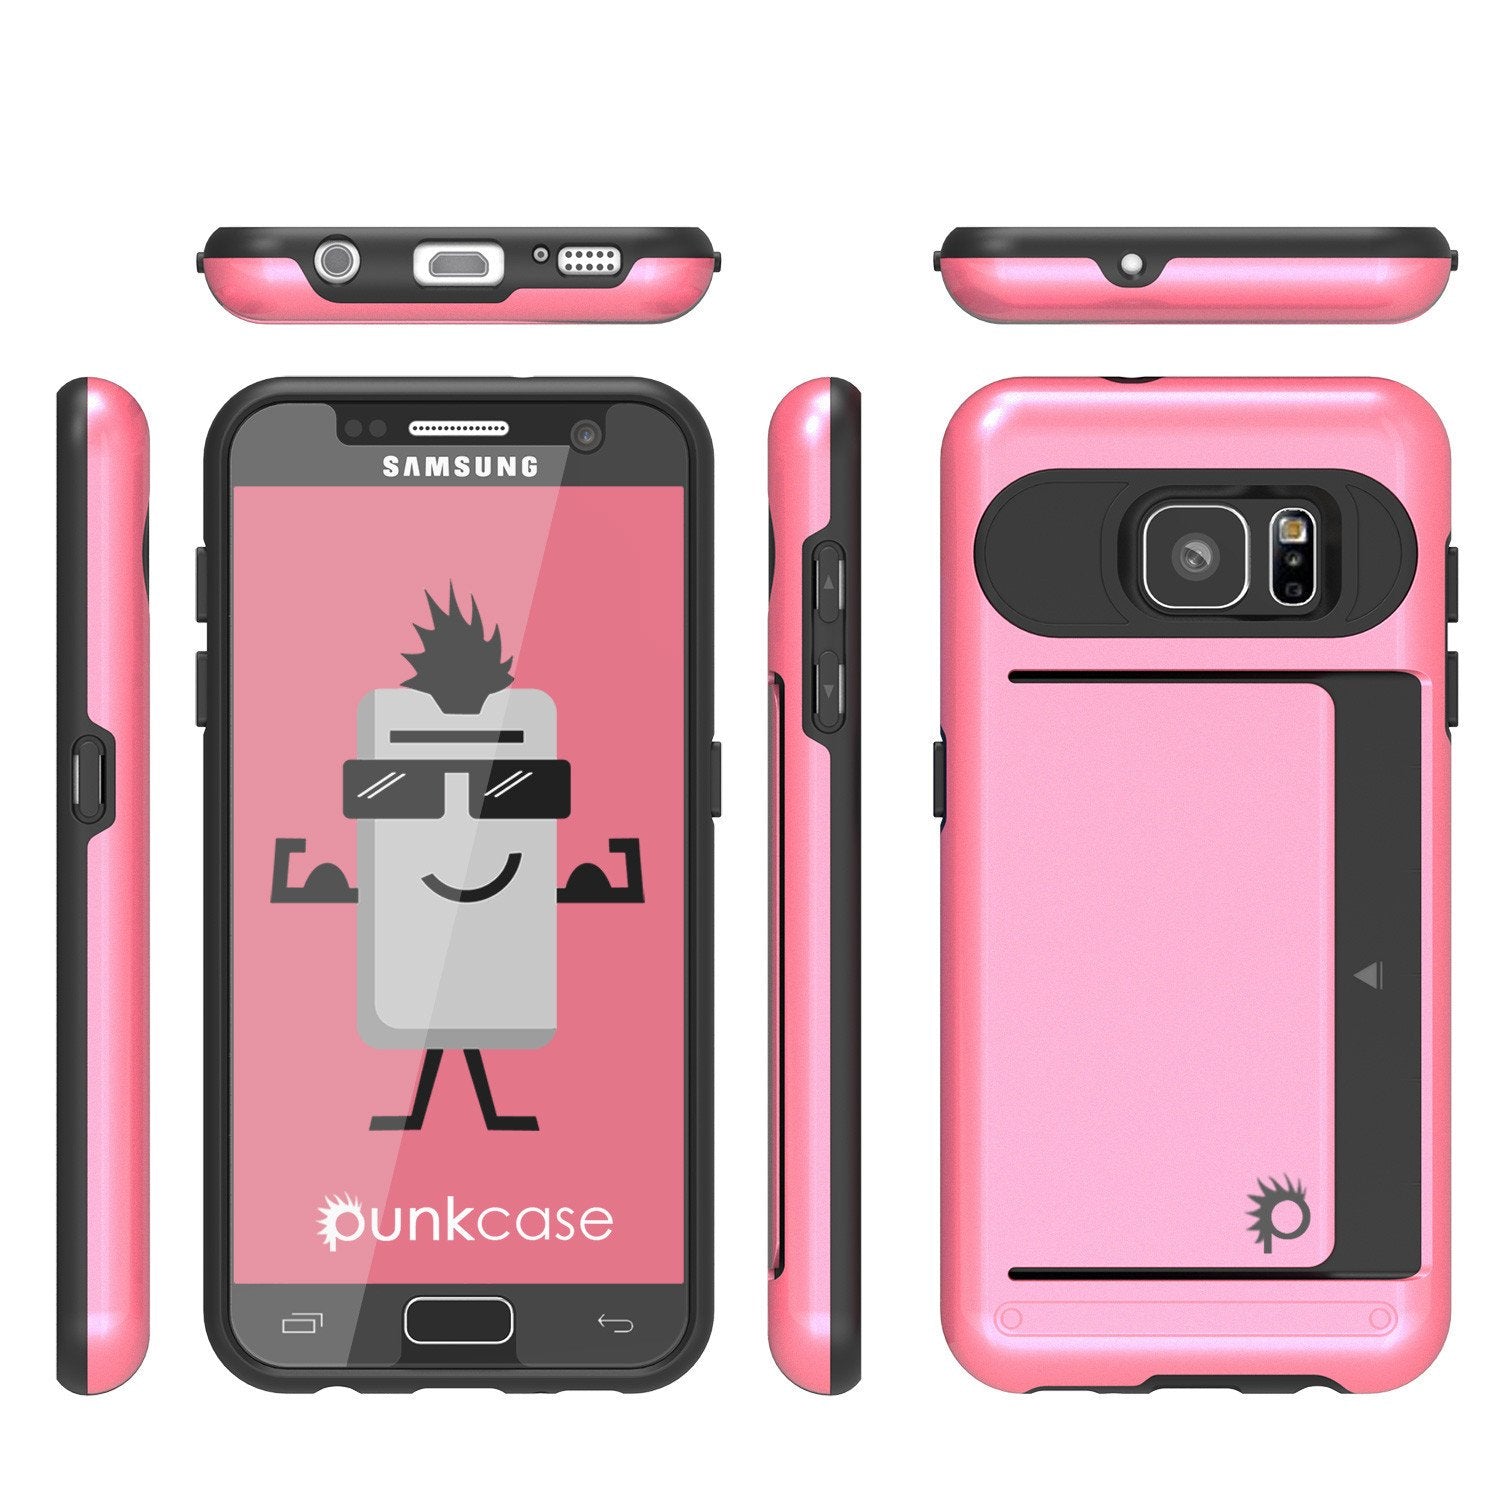 Galaxy S7 EDGE Case PunkCase CLUTCH Pink Series Slim Armor Soft Cover Case w/ Screen Protector - PunkCase NZ